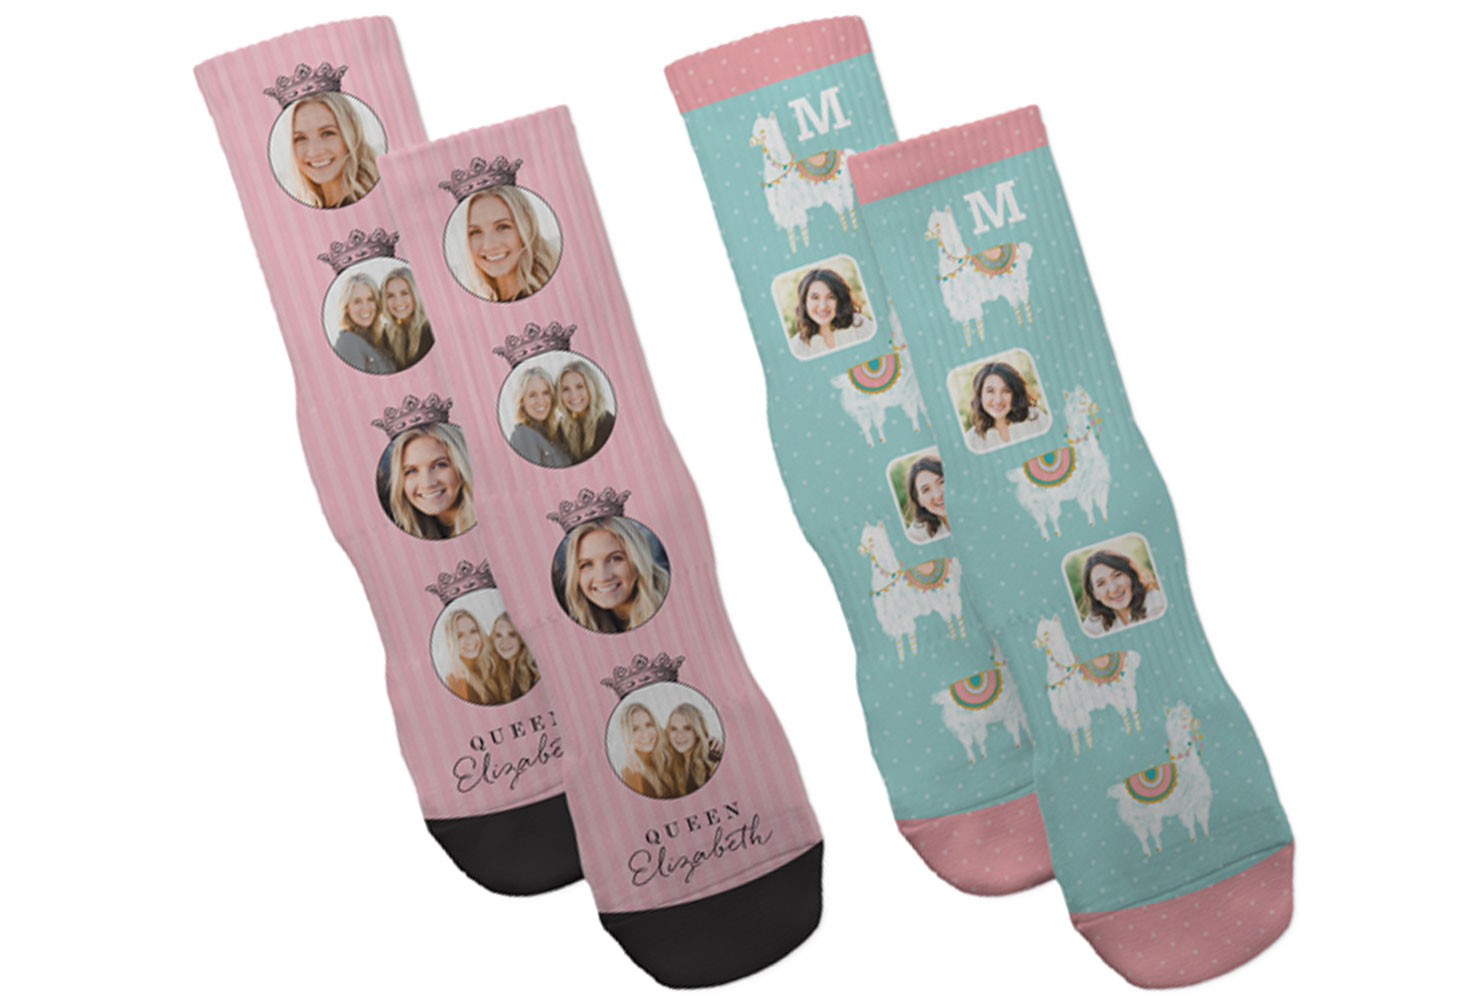 Monogrammed socks with pictures.